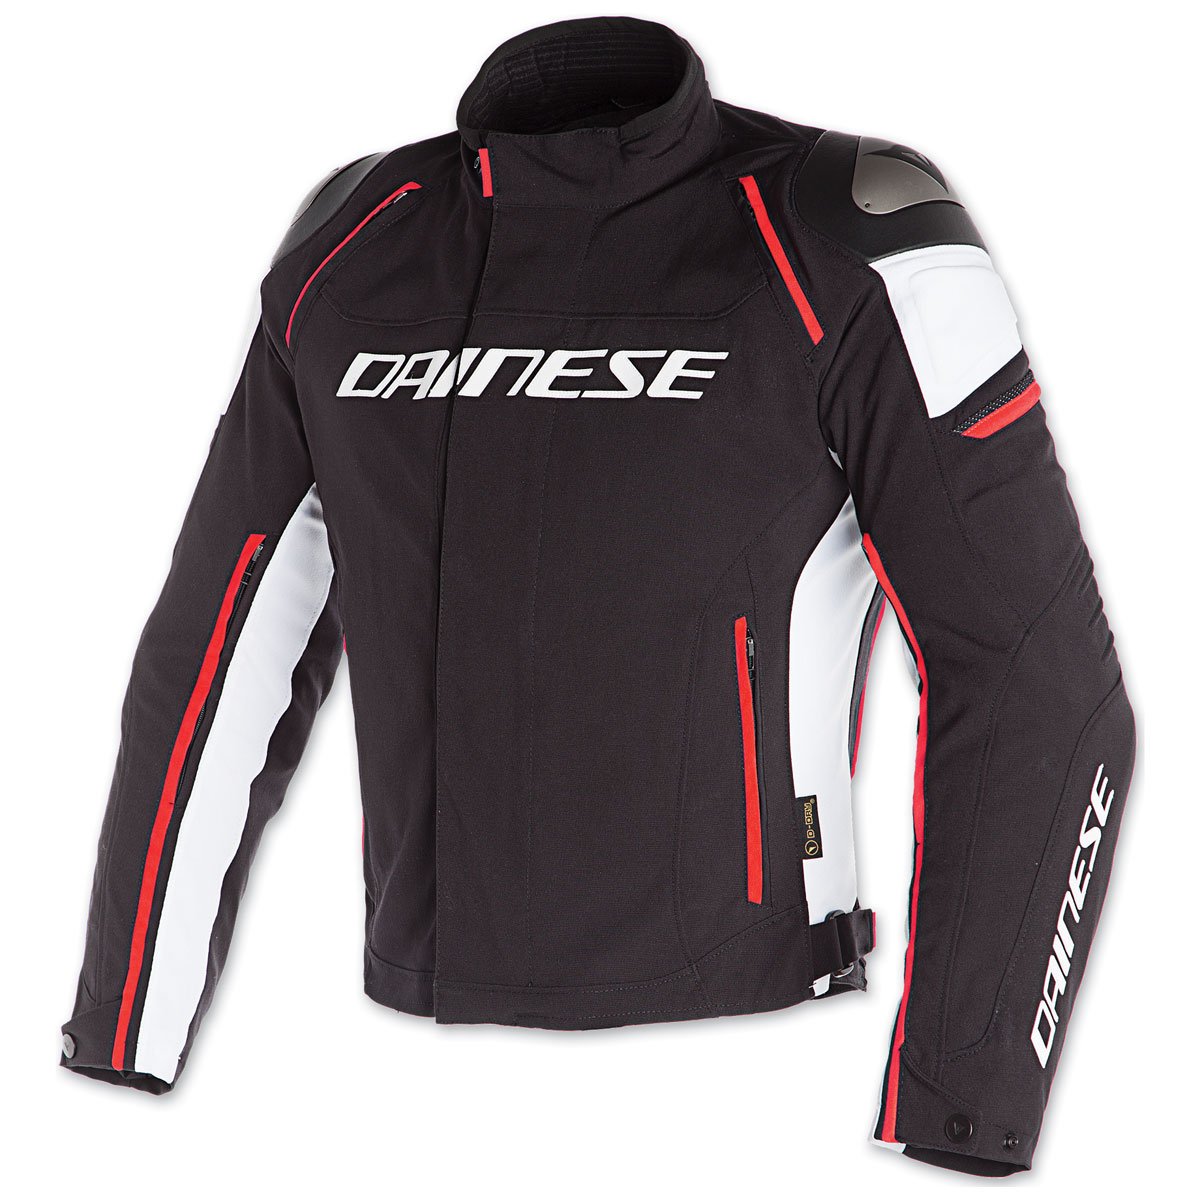 Image of Dainese Racing 3 D-Dry Jacket Black White Fluo Red Size 46 ID 8052644795929